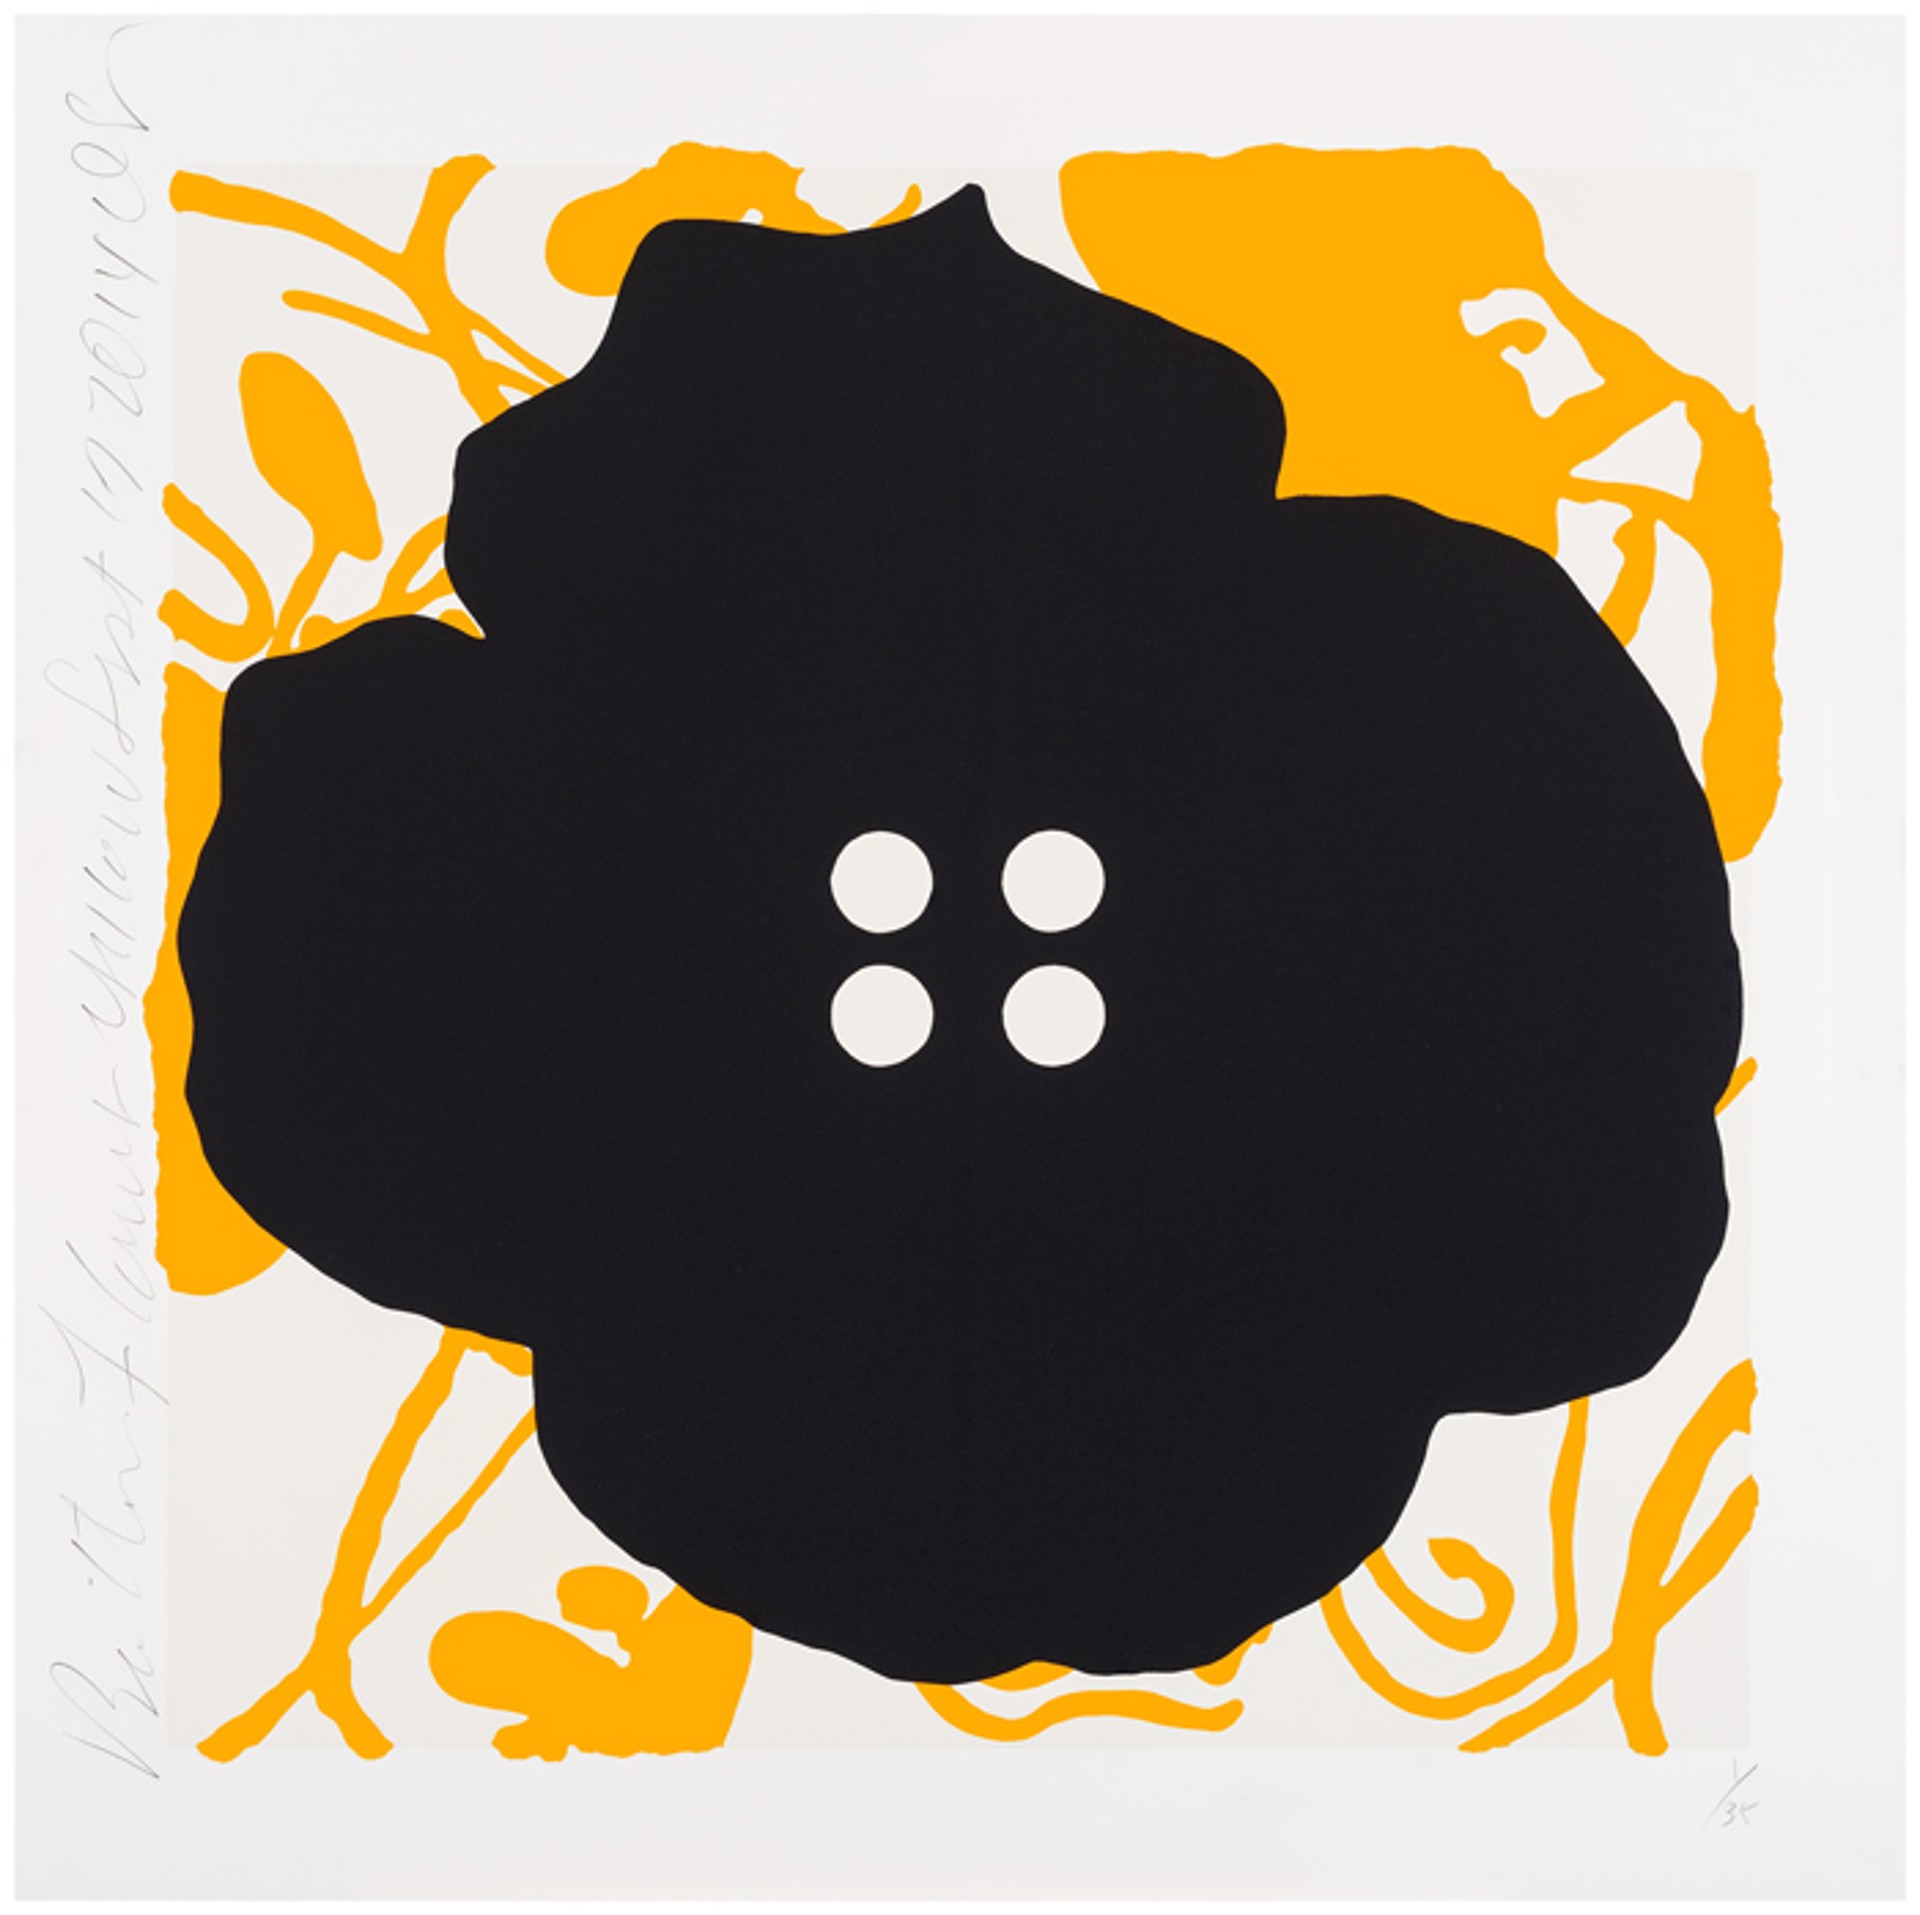 Button Flower Yellow, Sept 17, 2014 by Donald Sultan